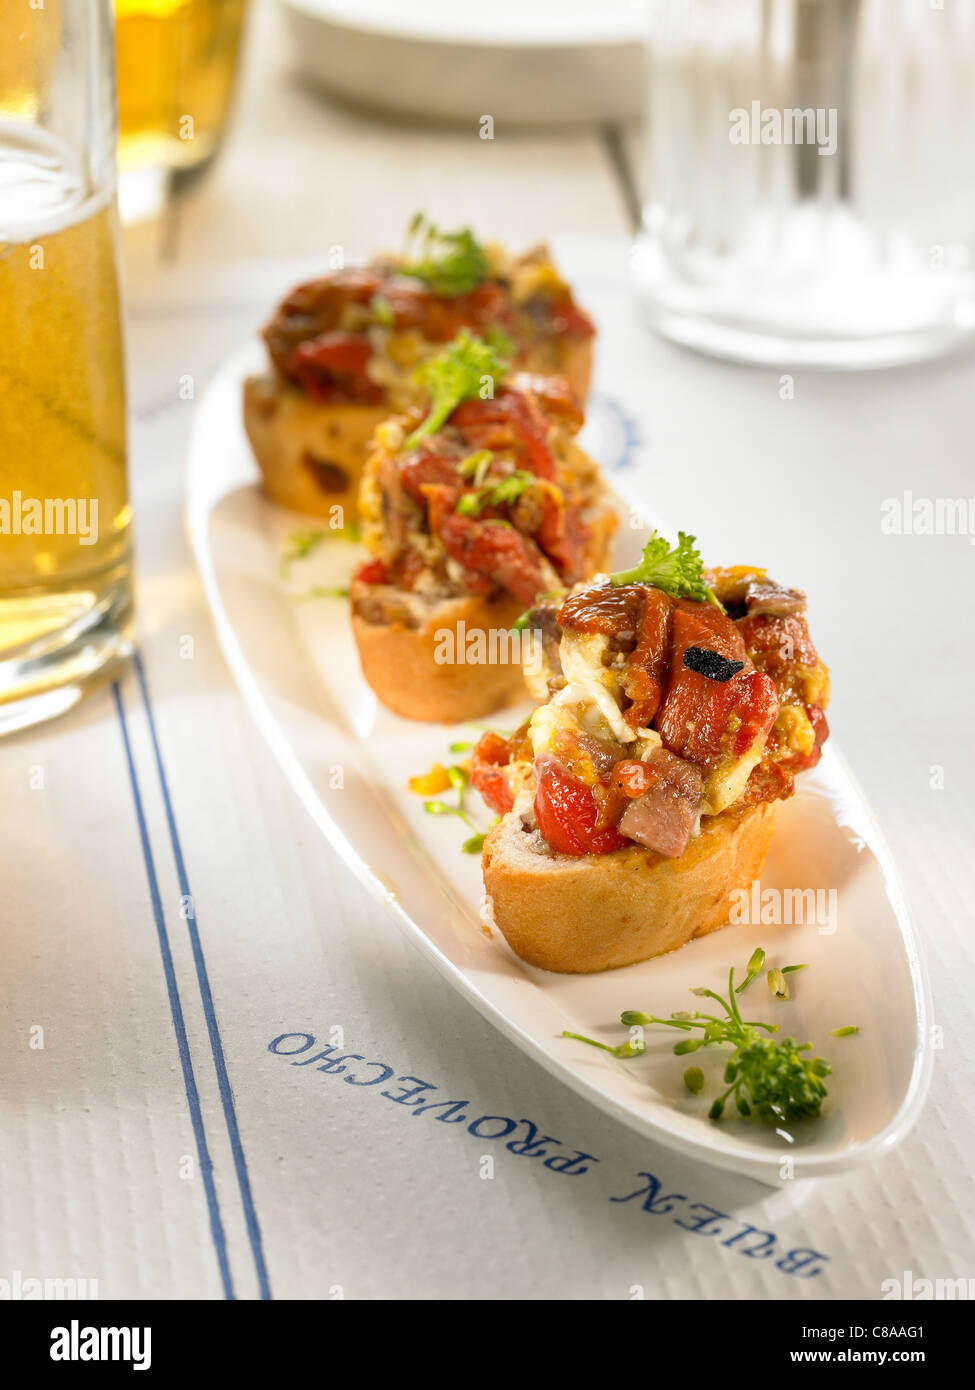 Scrambled egg and anchovy open sandwich Stock Photo